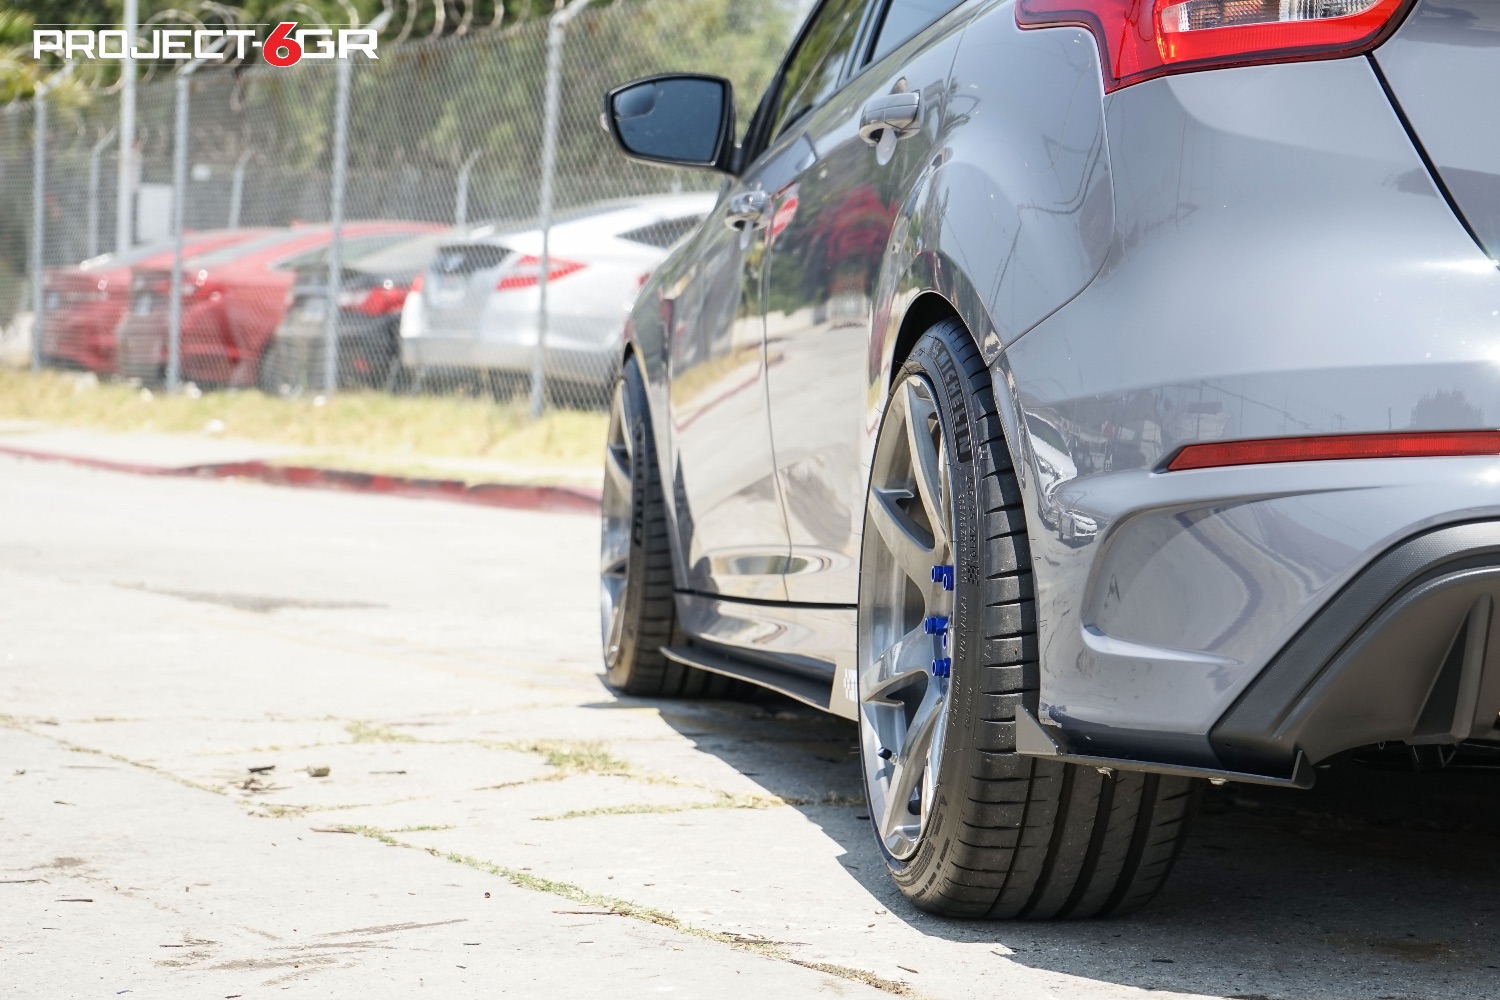 project-6gr-wheelsbrushed-titanium-ford-focus-rs-19x95-19x10-08_35506996981_o